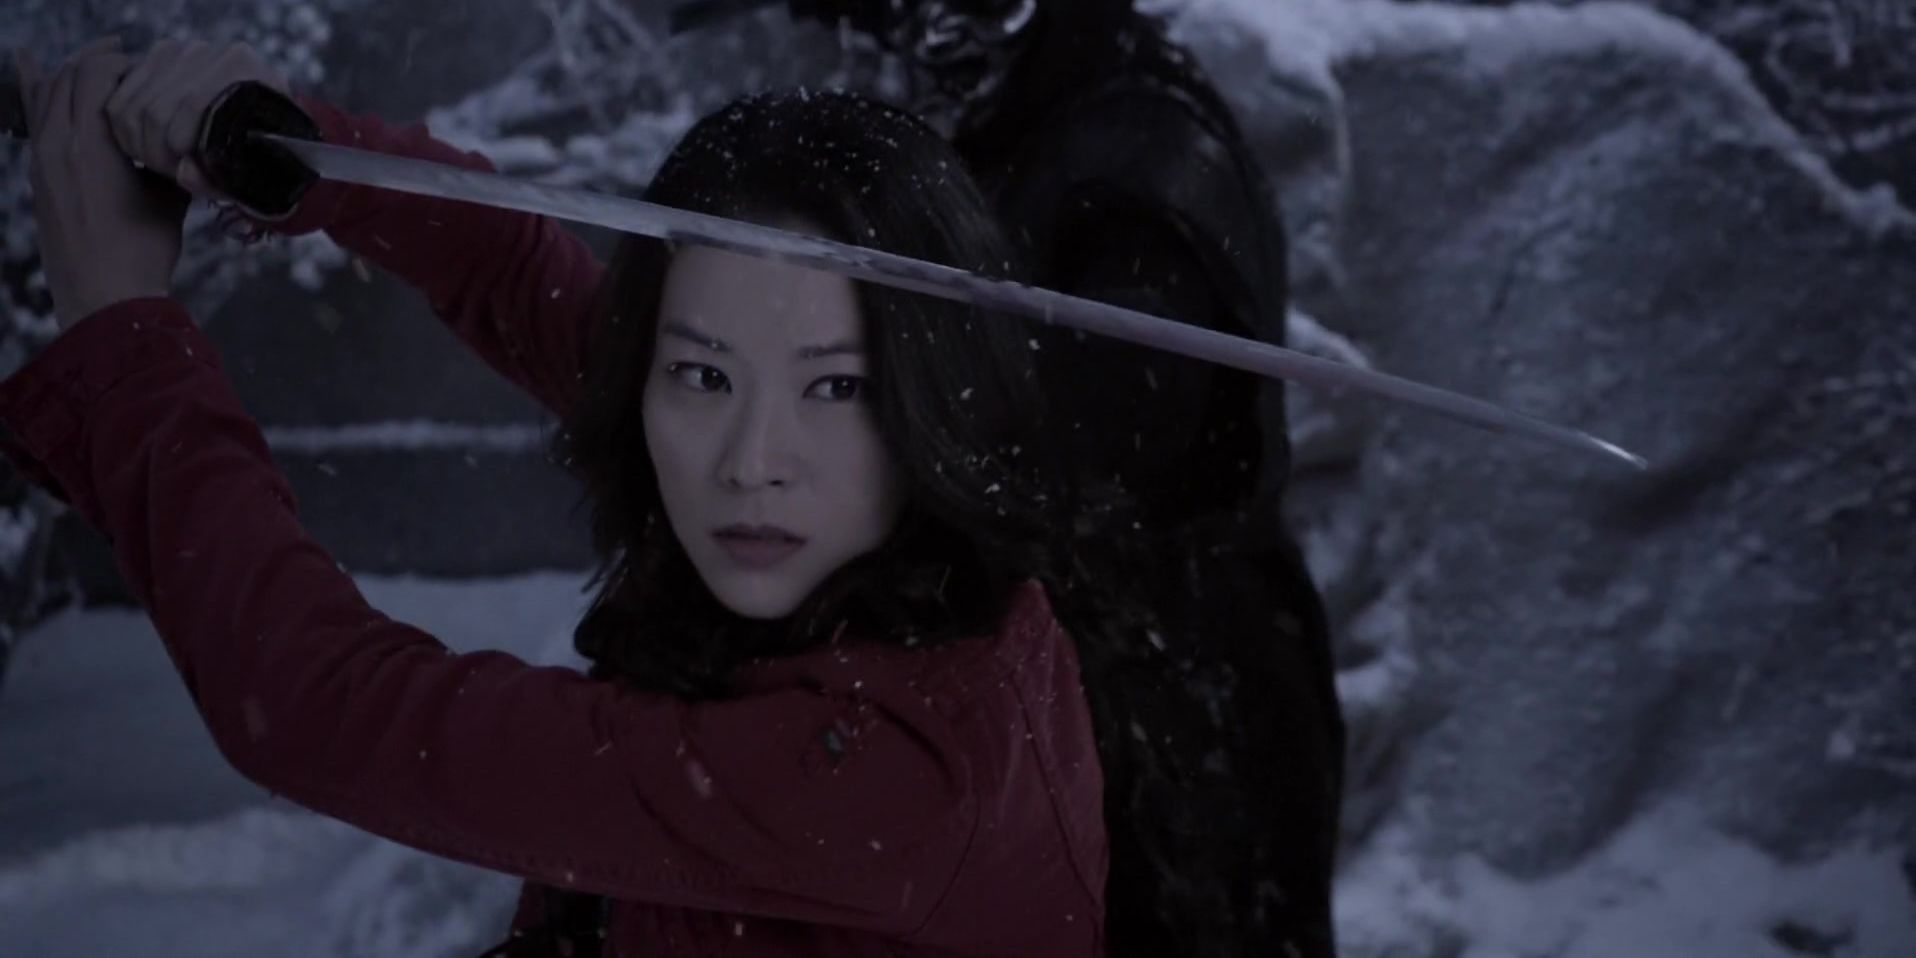 kira holding up her sword in teen wolf